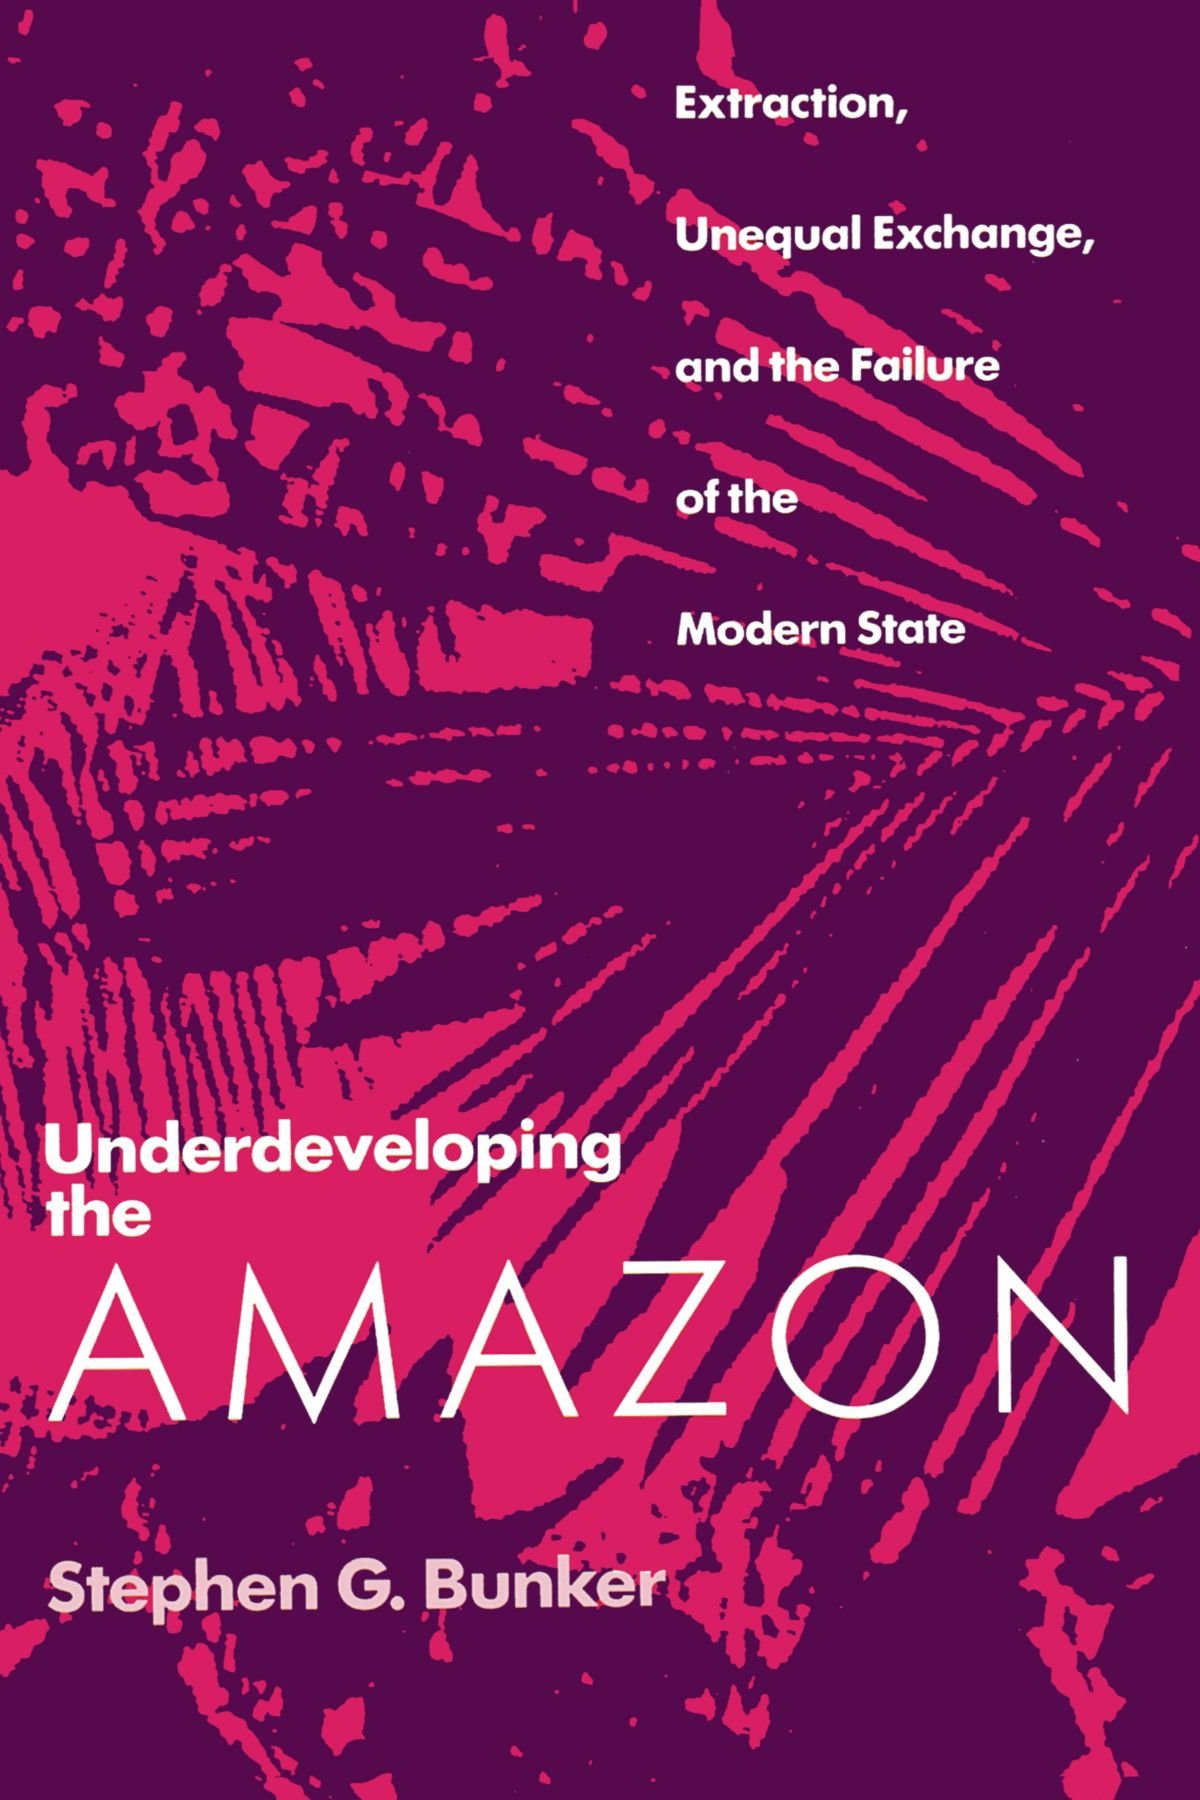 Underdeveloping the Amazon: Extraction, Unequal Exchange, and the Failure of the Modern